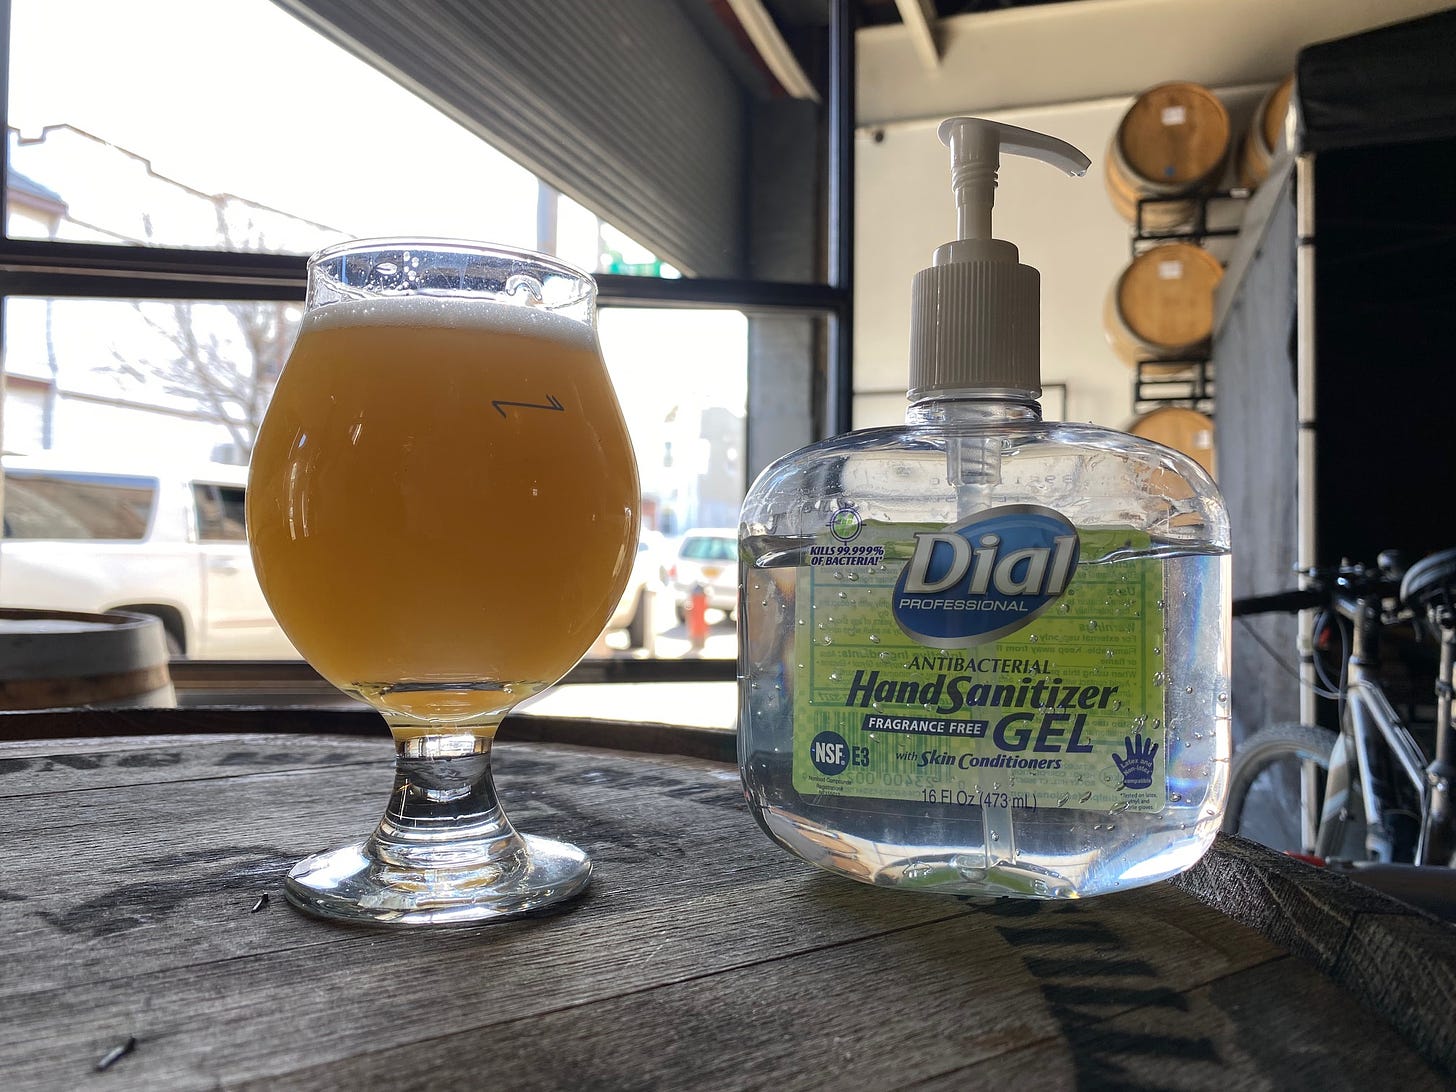 A glass of hazy IPA next to a bottle of hand sanitizer